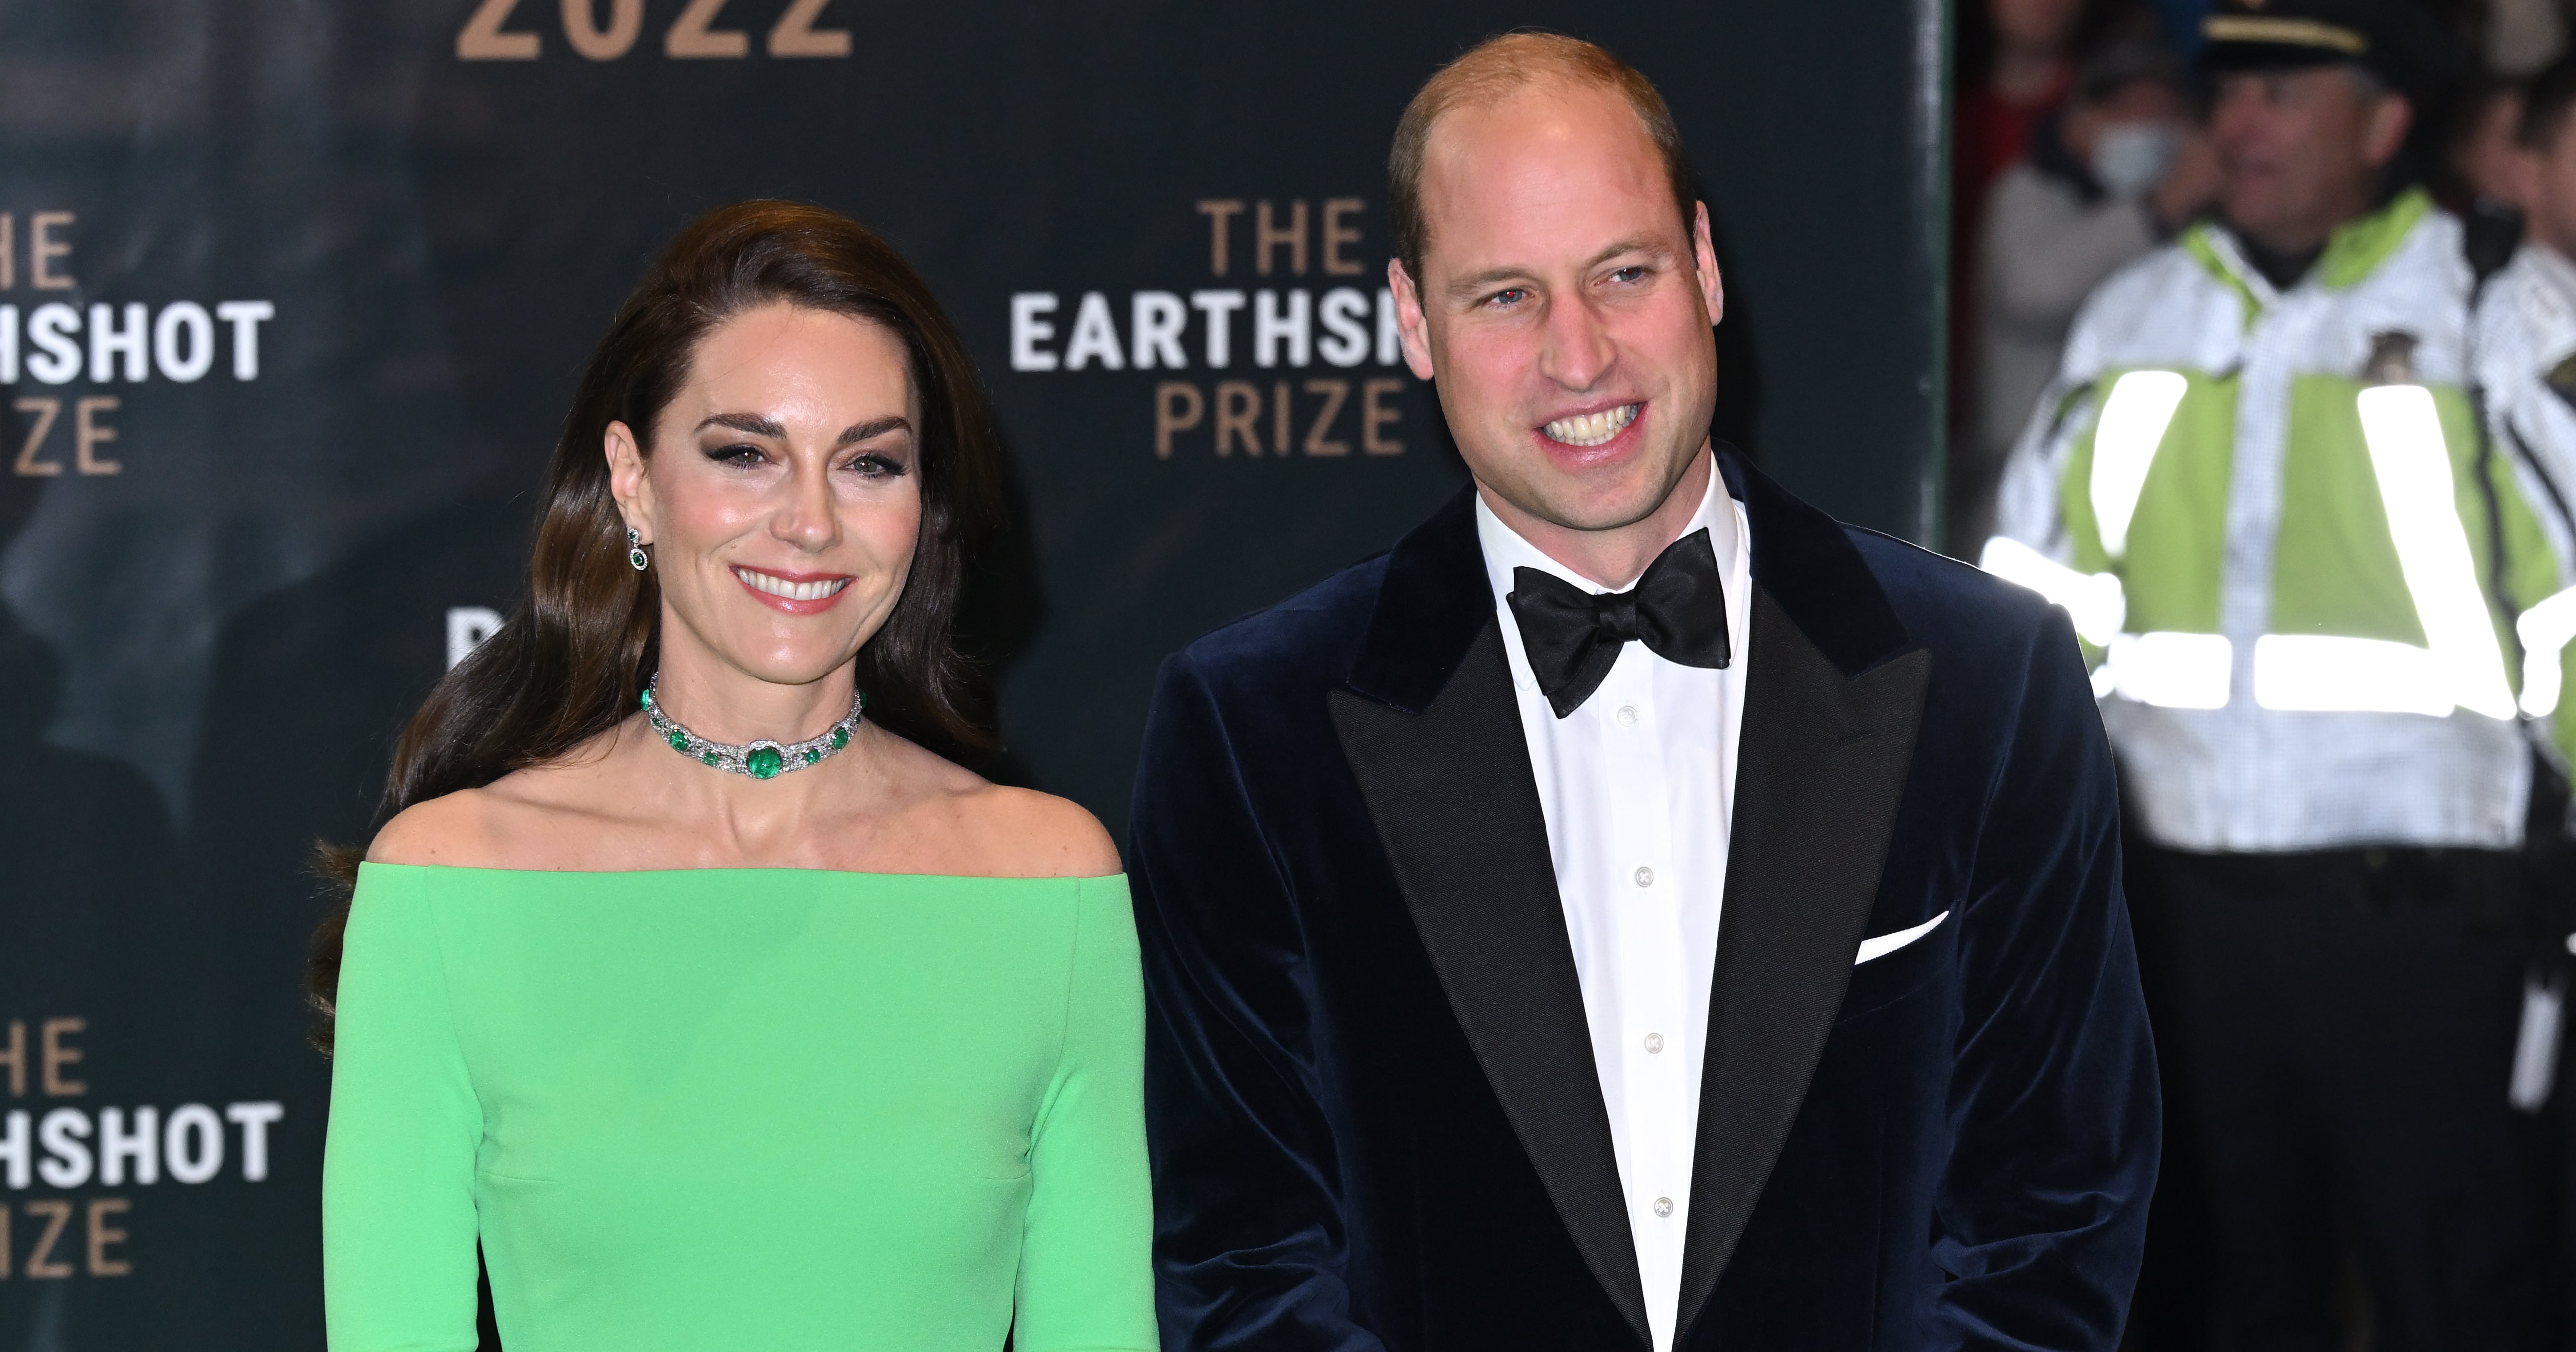 Prince William and Kate's ex-girlfriends and boyfriends